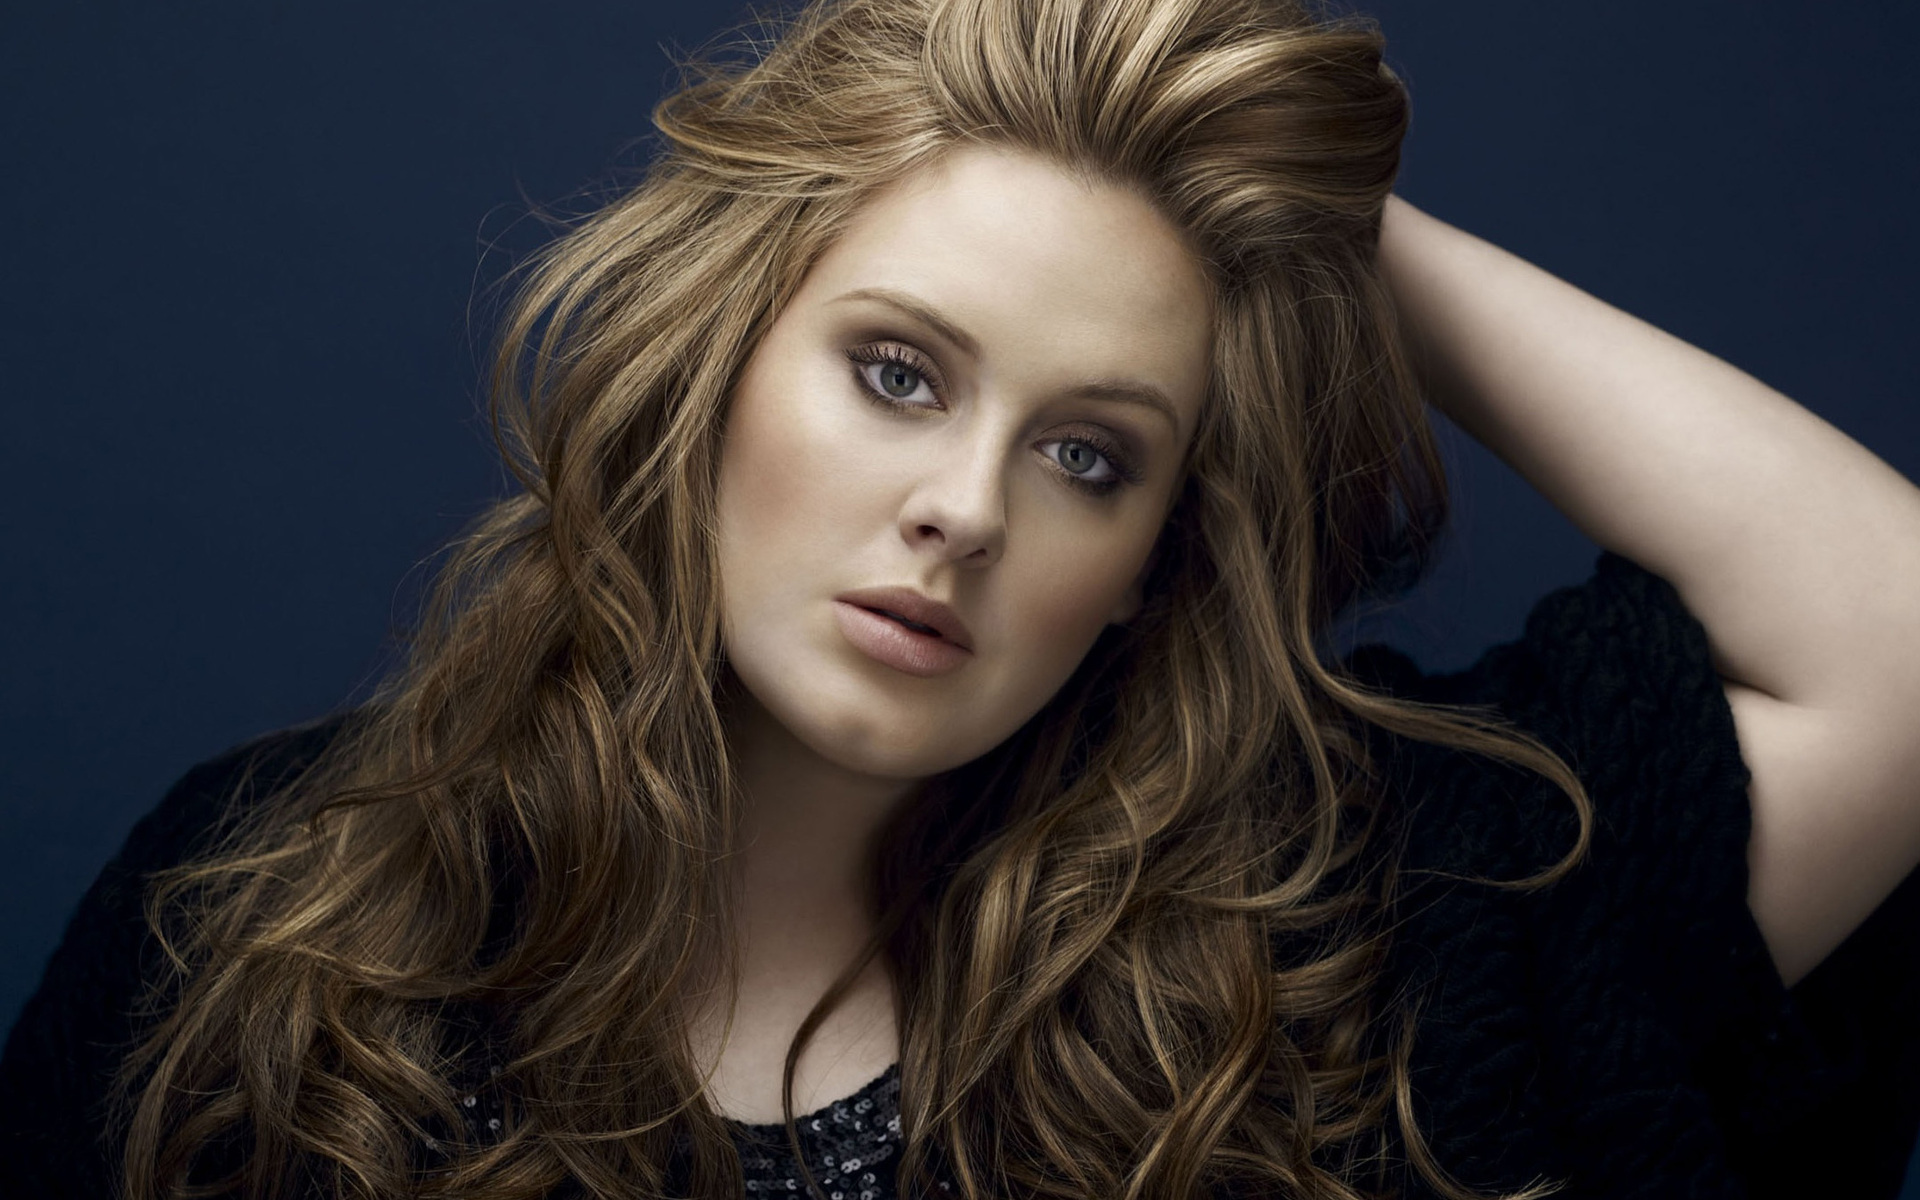 Adele with curly blonde hair with her hand on her head